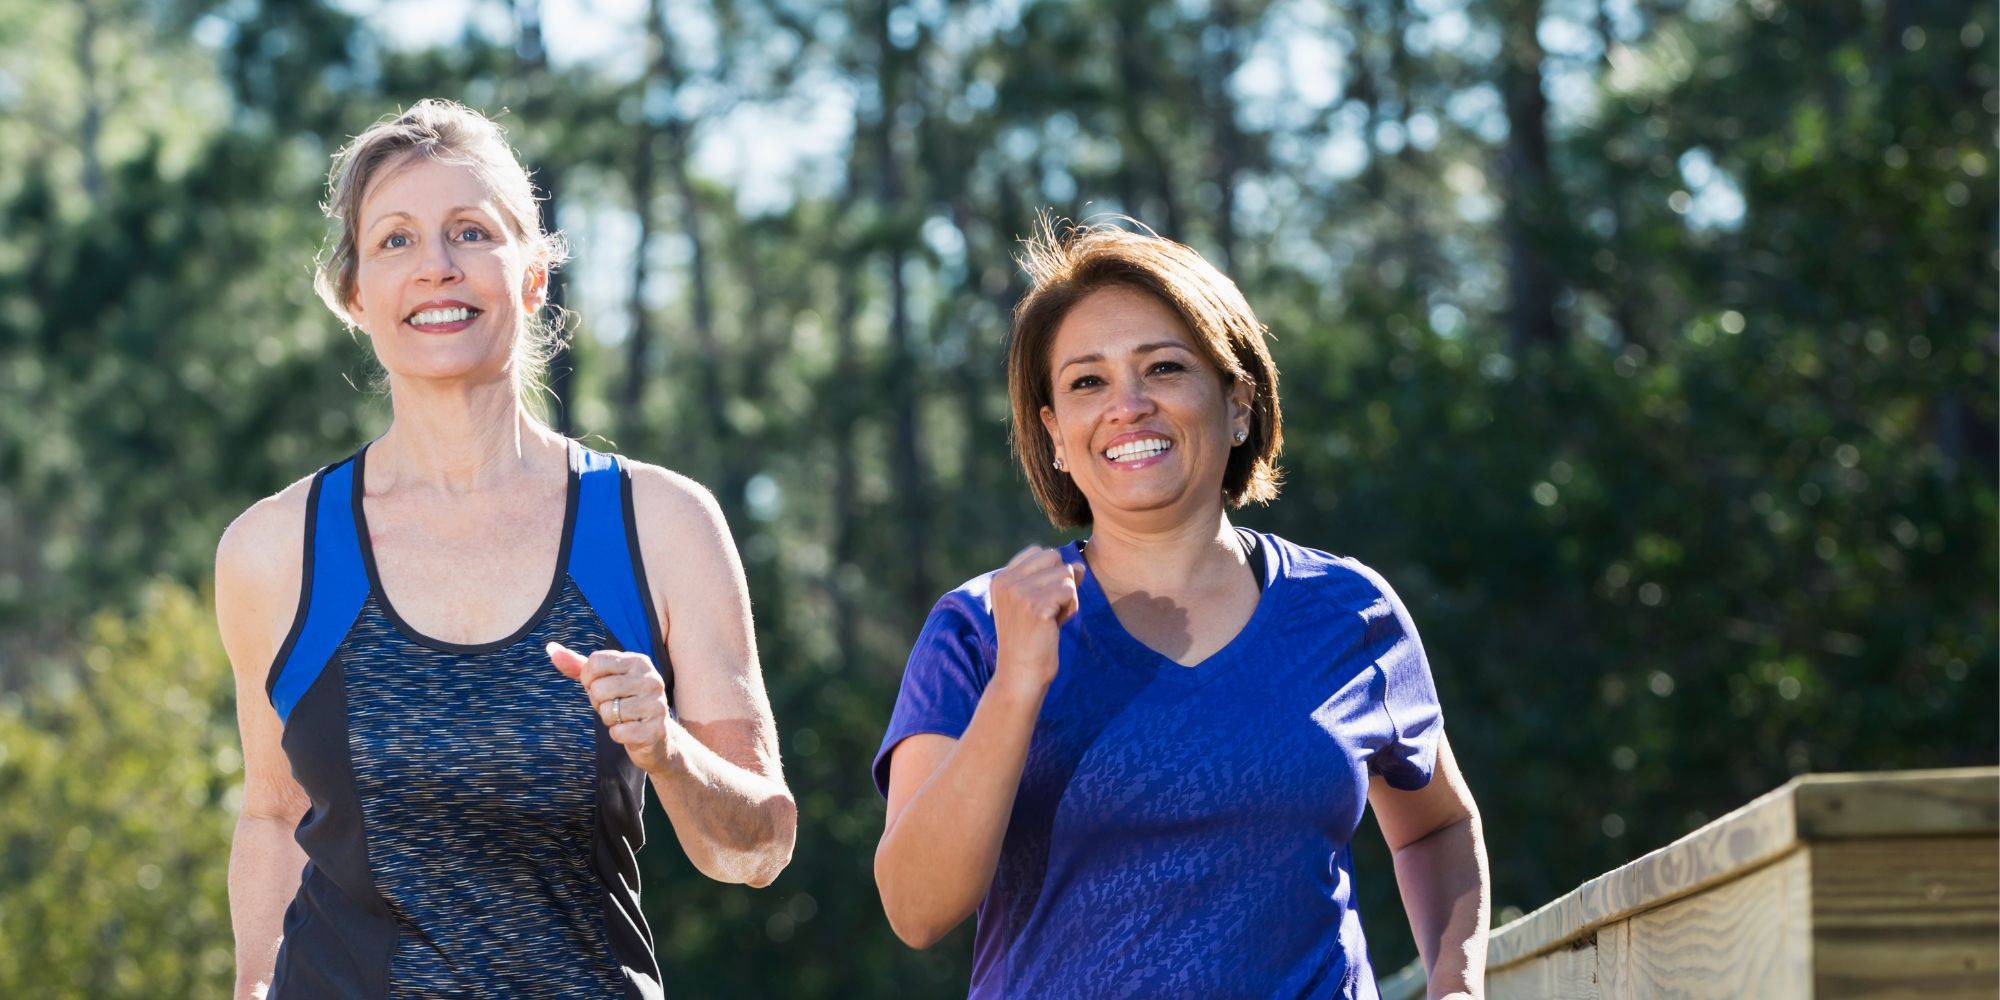 two women smiling and power walking